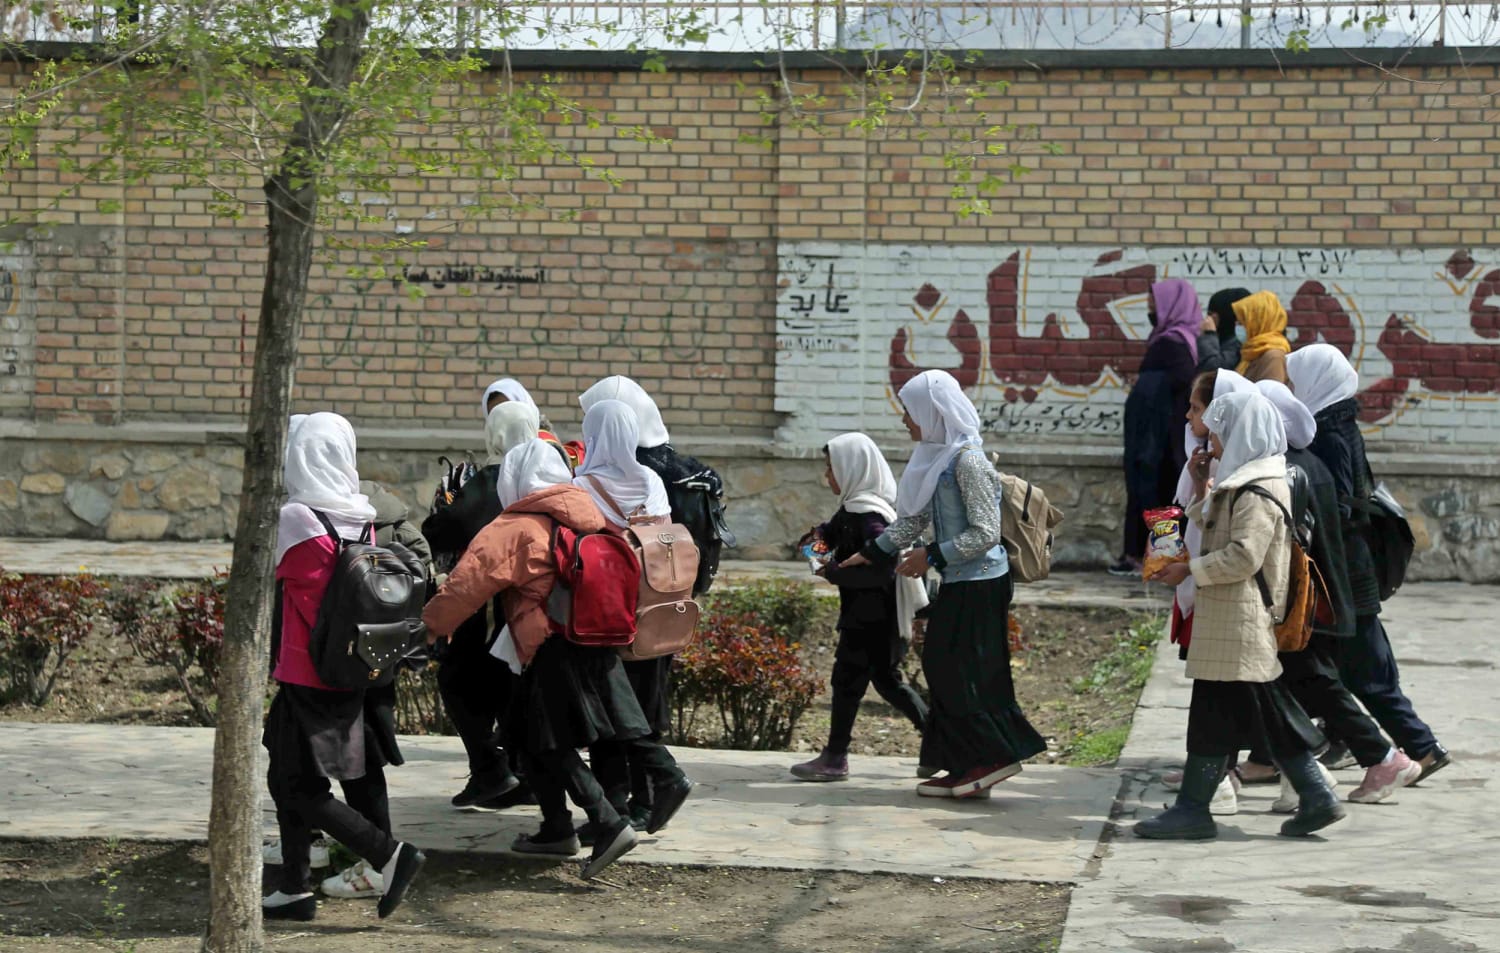 Almost 80 schoolgirls poisoned and hospitalized in Afghanistan, official says